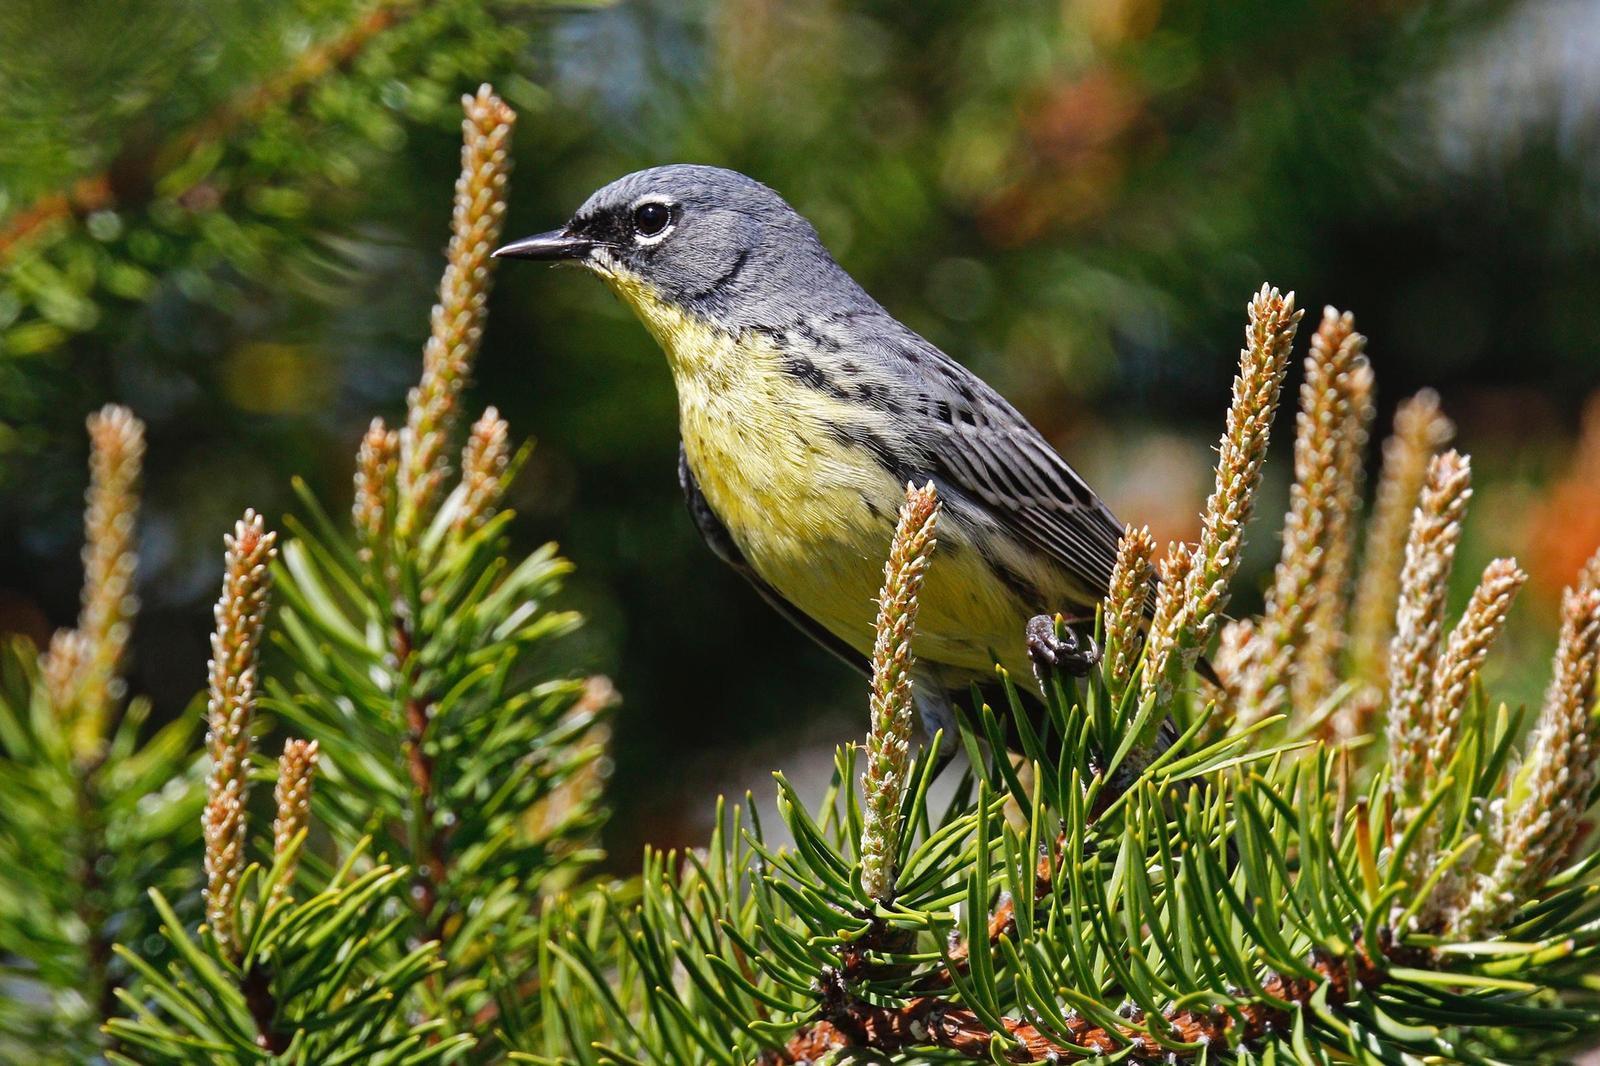 Kirtland's Warbler Photo by Emily Willoughby